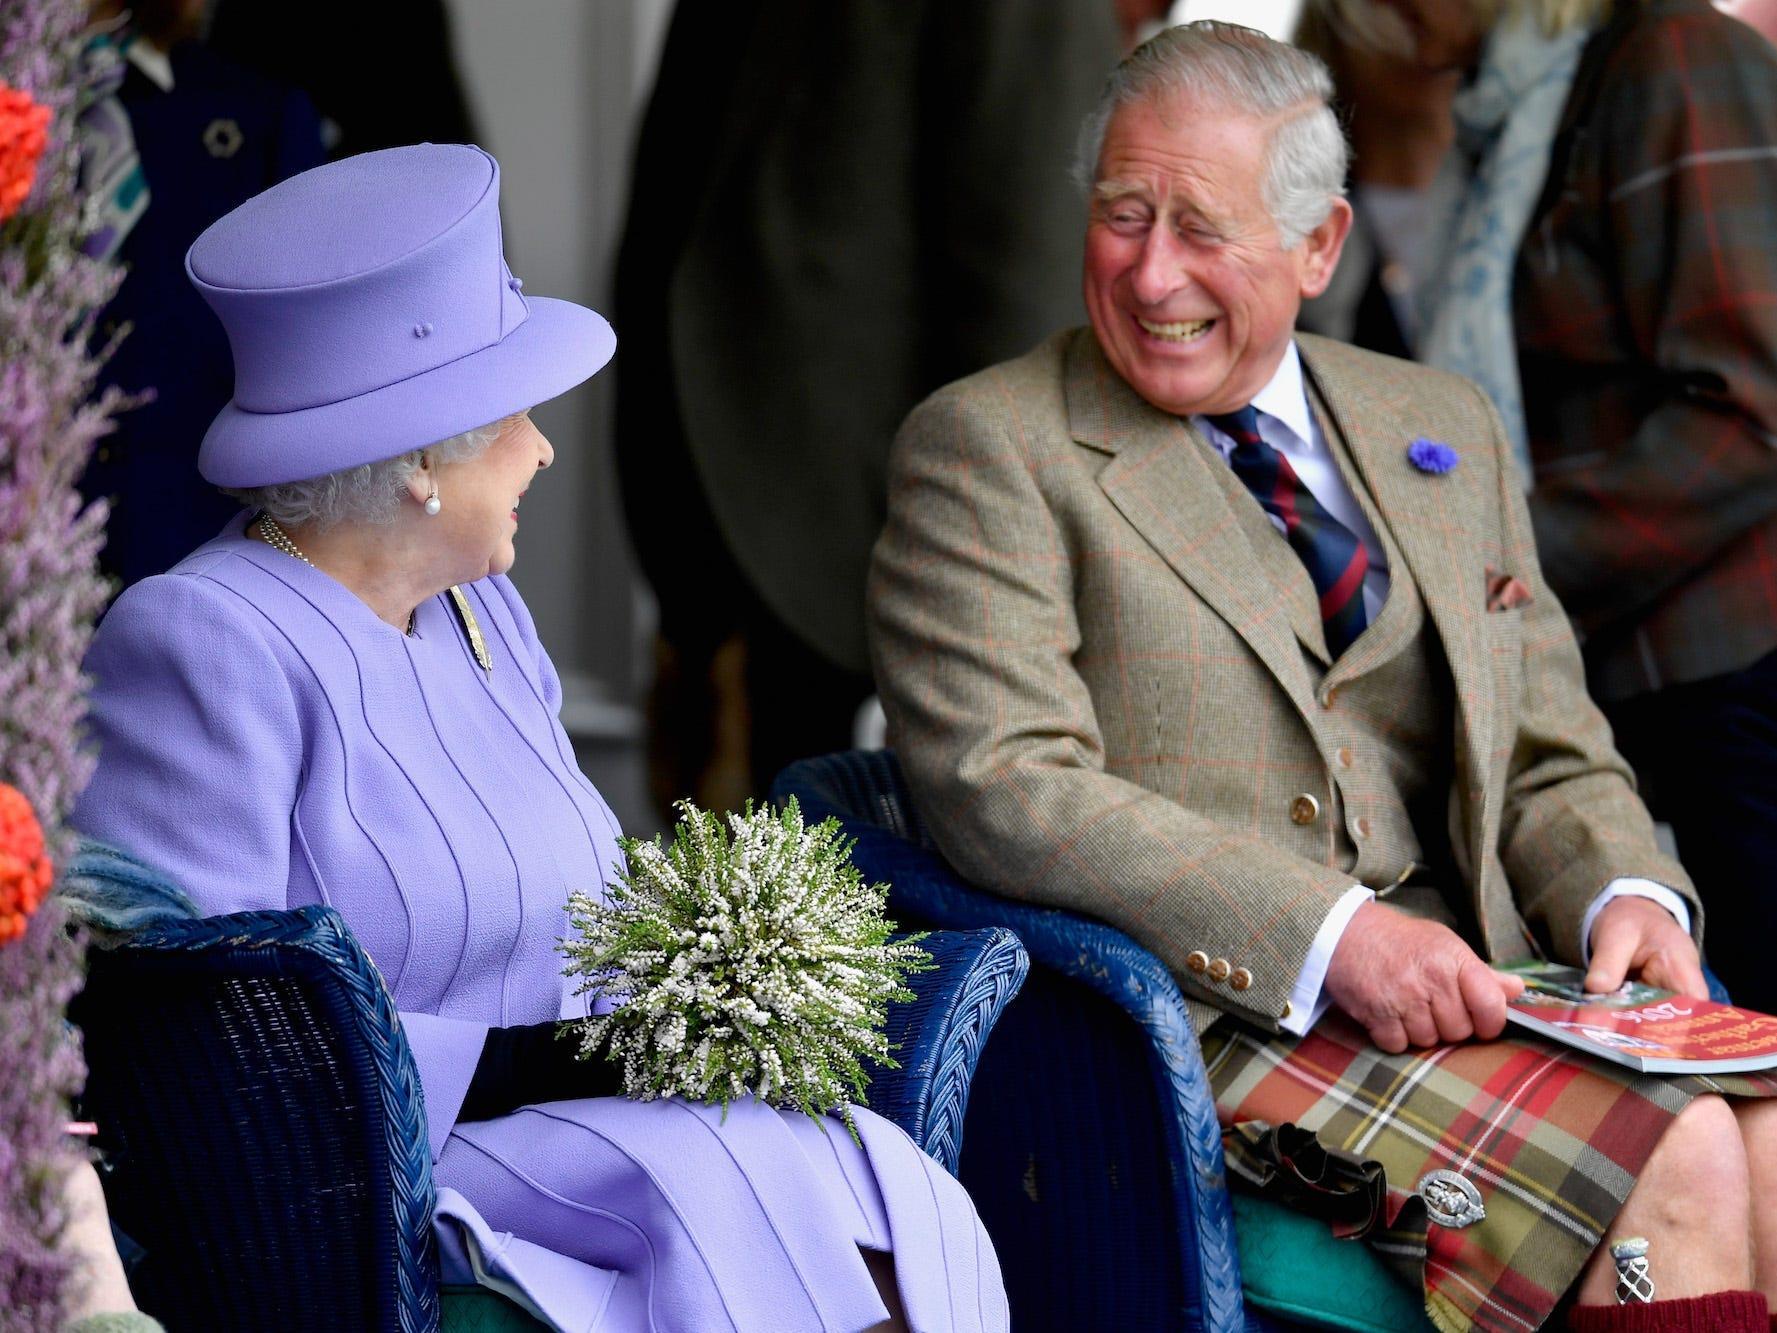 The Queen shared 2 photos of Prince Charles for his 72nd birthday, and